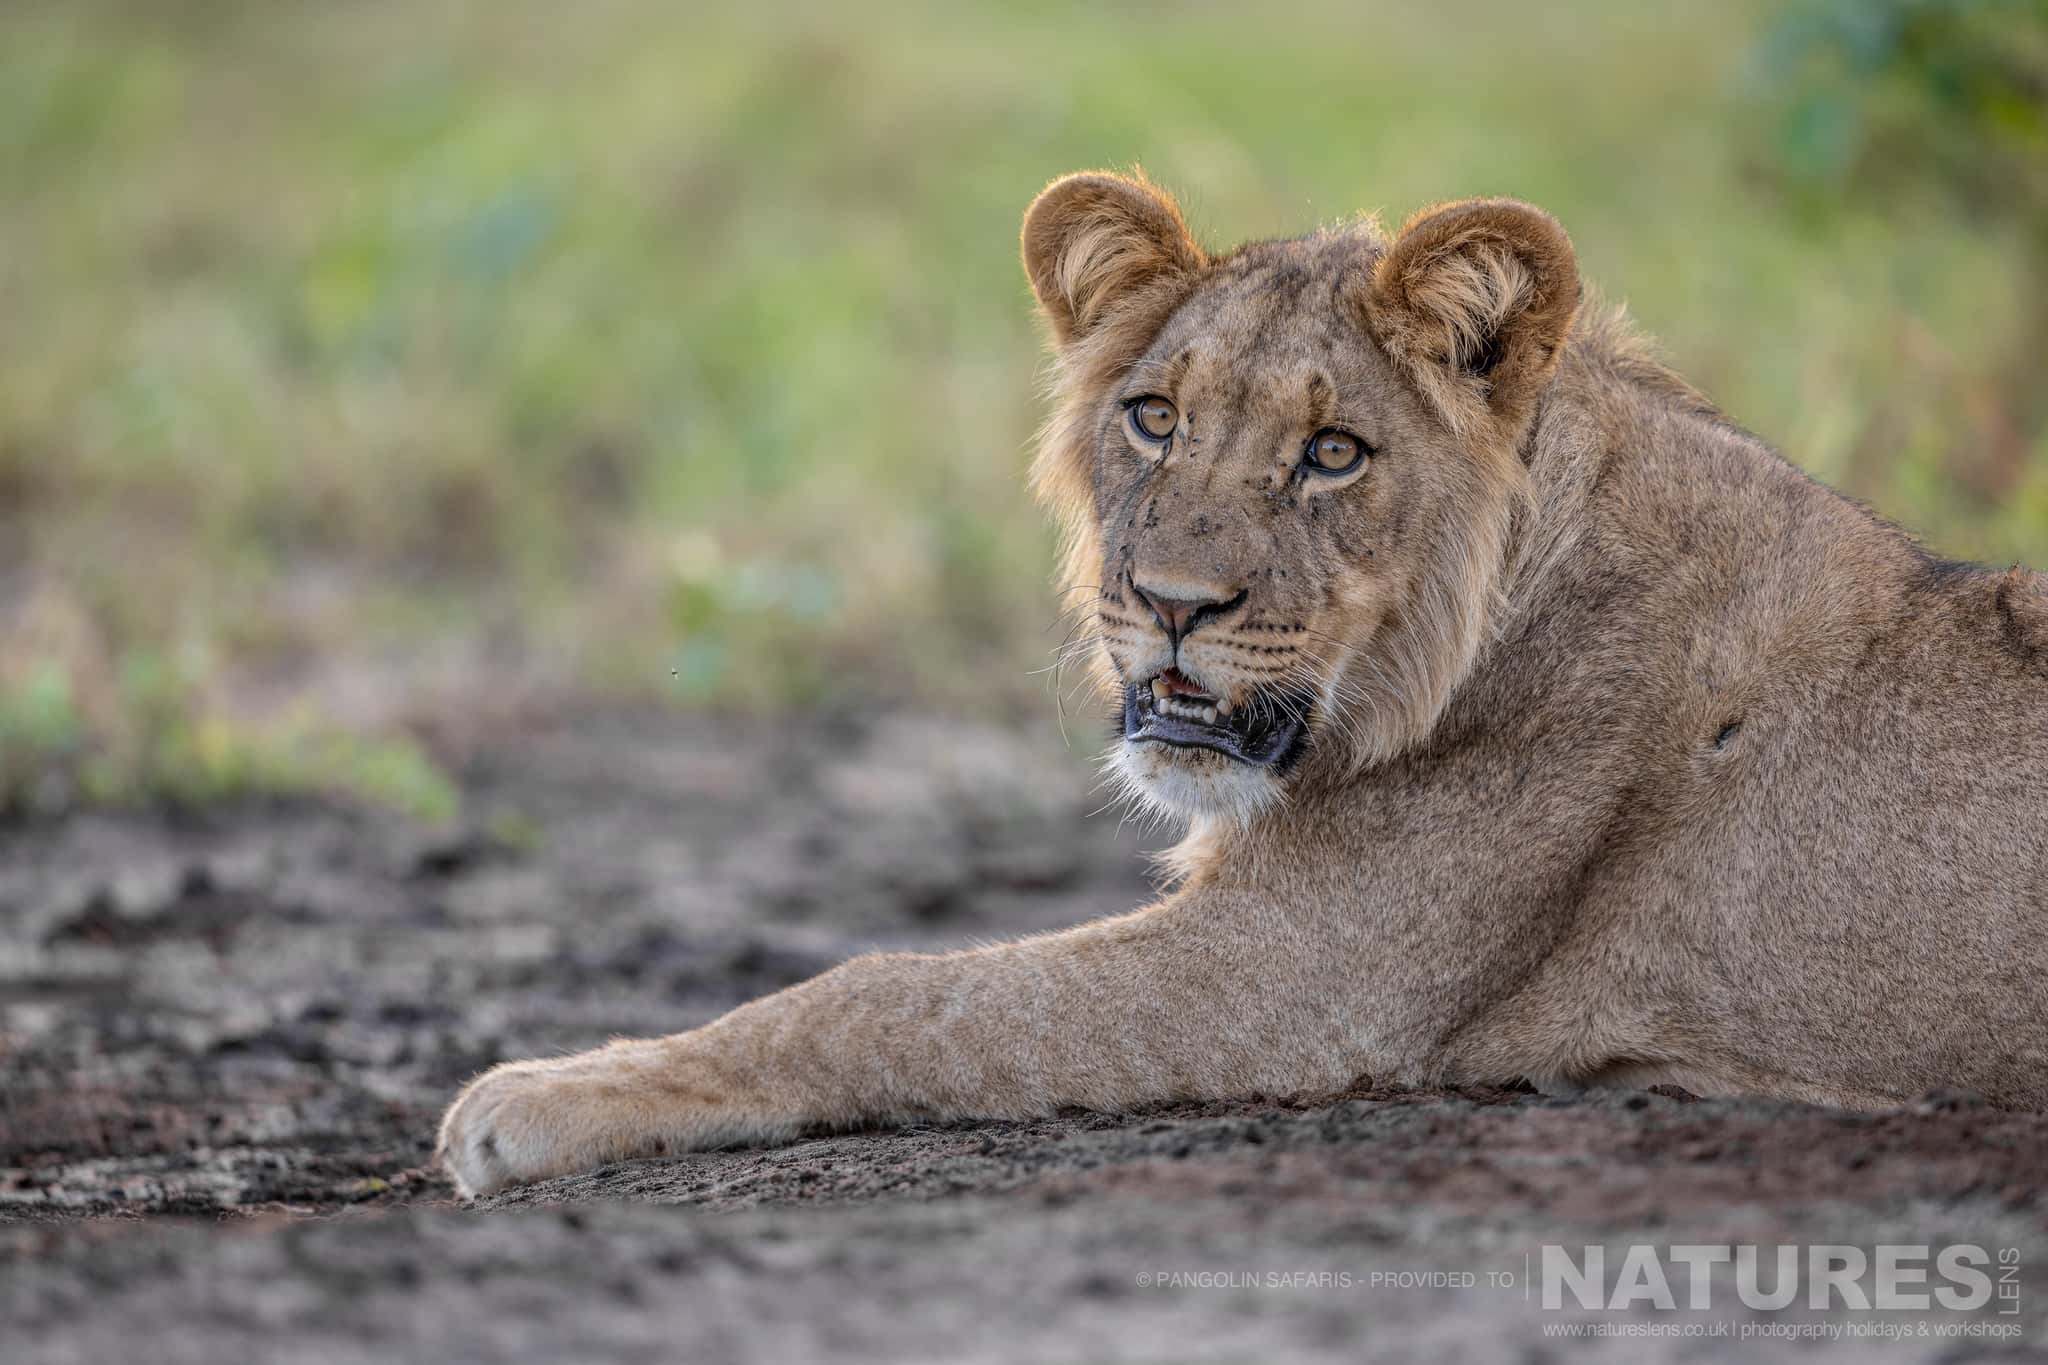 A Sub Adult Male Lion Typical Of The Kind Of Image We Hope To Capture During The Wildlife Of The Chobe River & Dinaka Private Conservancy Photography Holiday